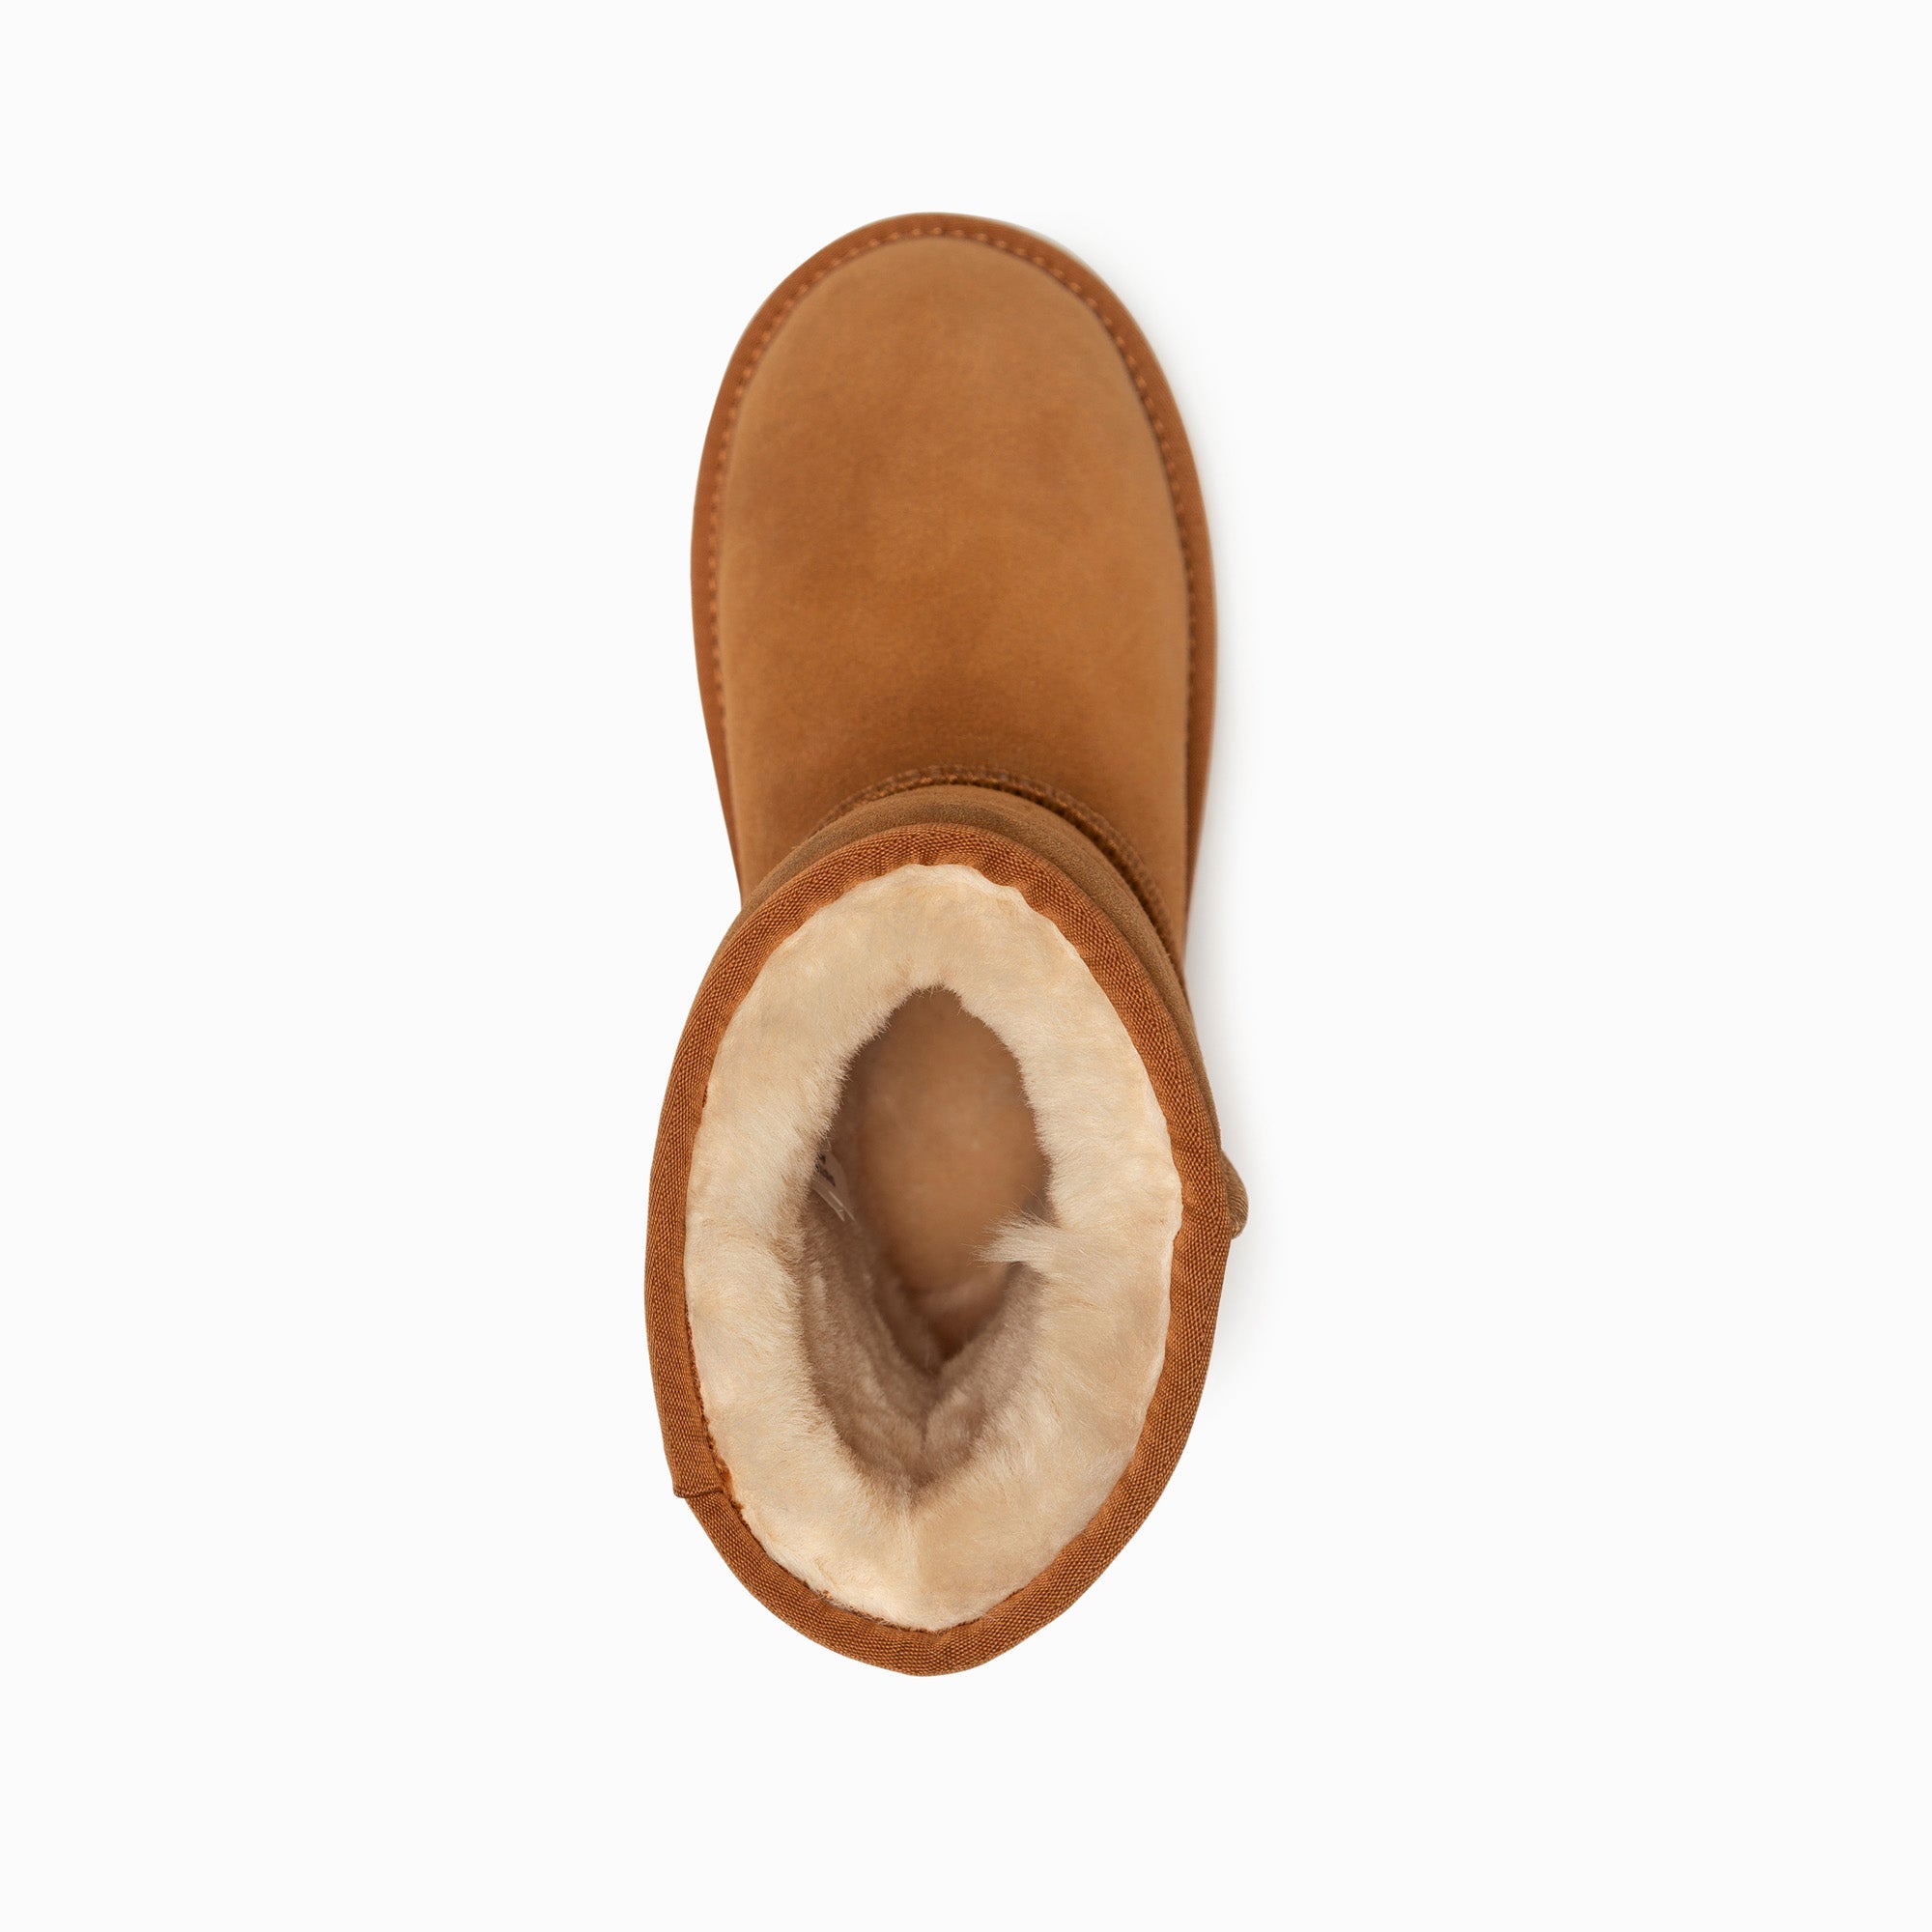 Ugg Boots Genuine Australian Sheepskin Unisex Ankle Classic Suede-Boots-PEROZ Accessories